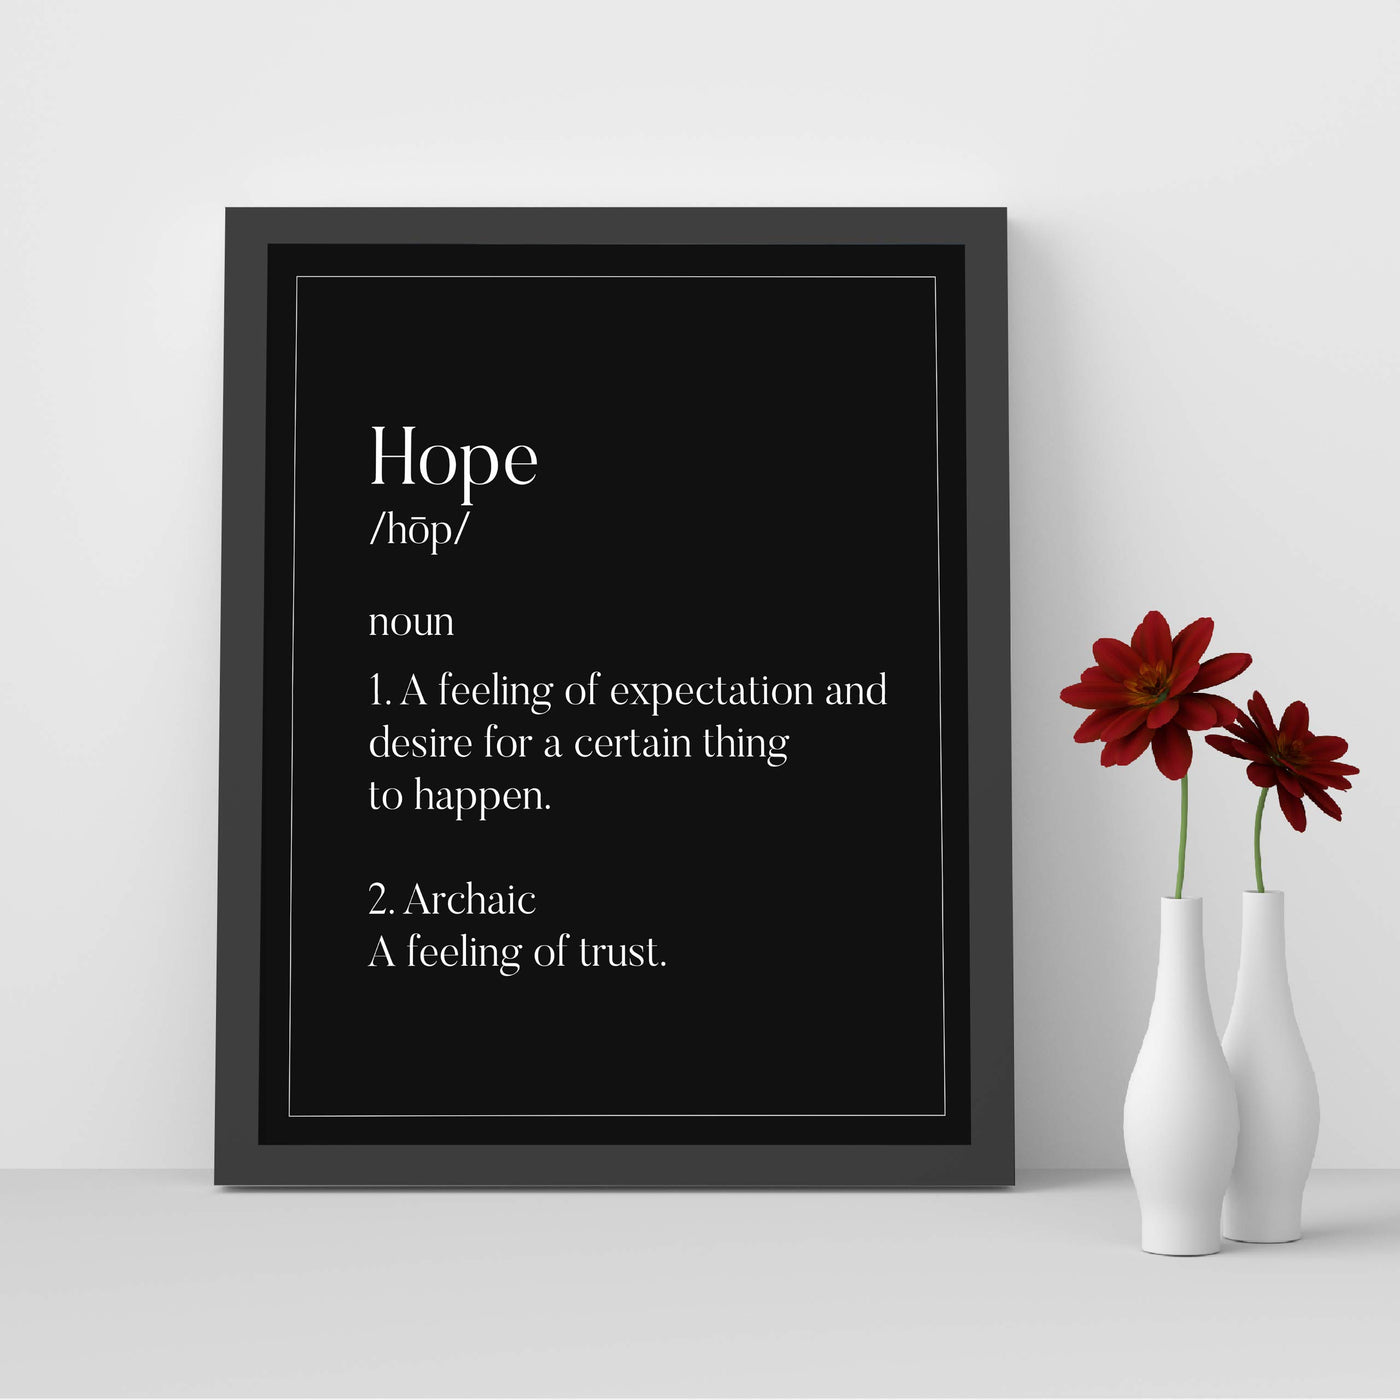 Definition of Hope Inspirational Wall Sign -8 x 10" Christian Art Print-Ready to Frame. Modern Typographic Design. Home-Office-Family Room-Church-Religious Decor. Great Gift of Inspiration!